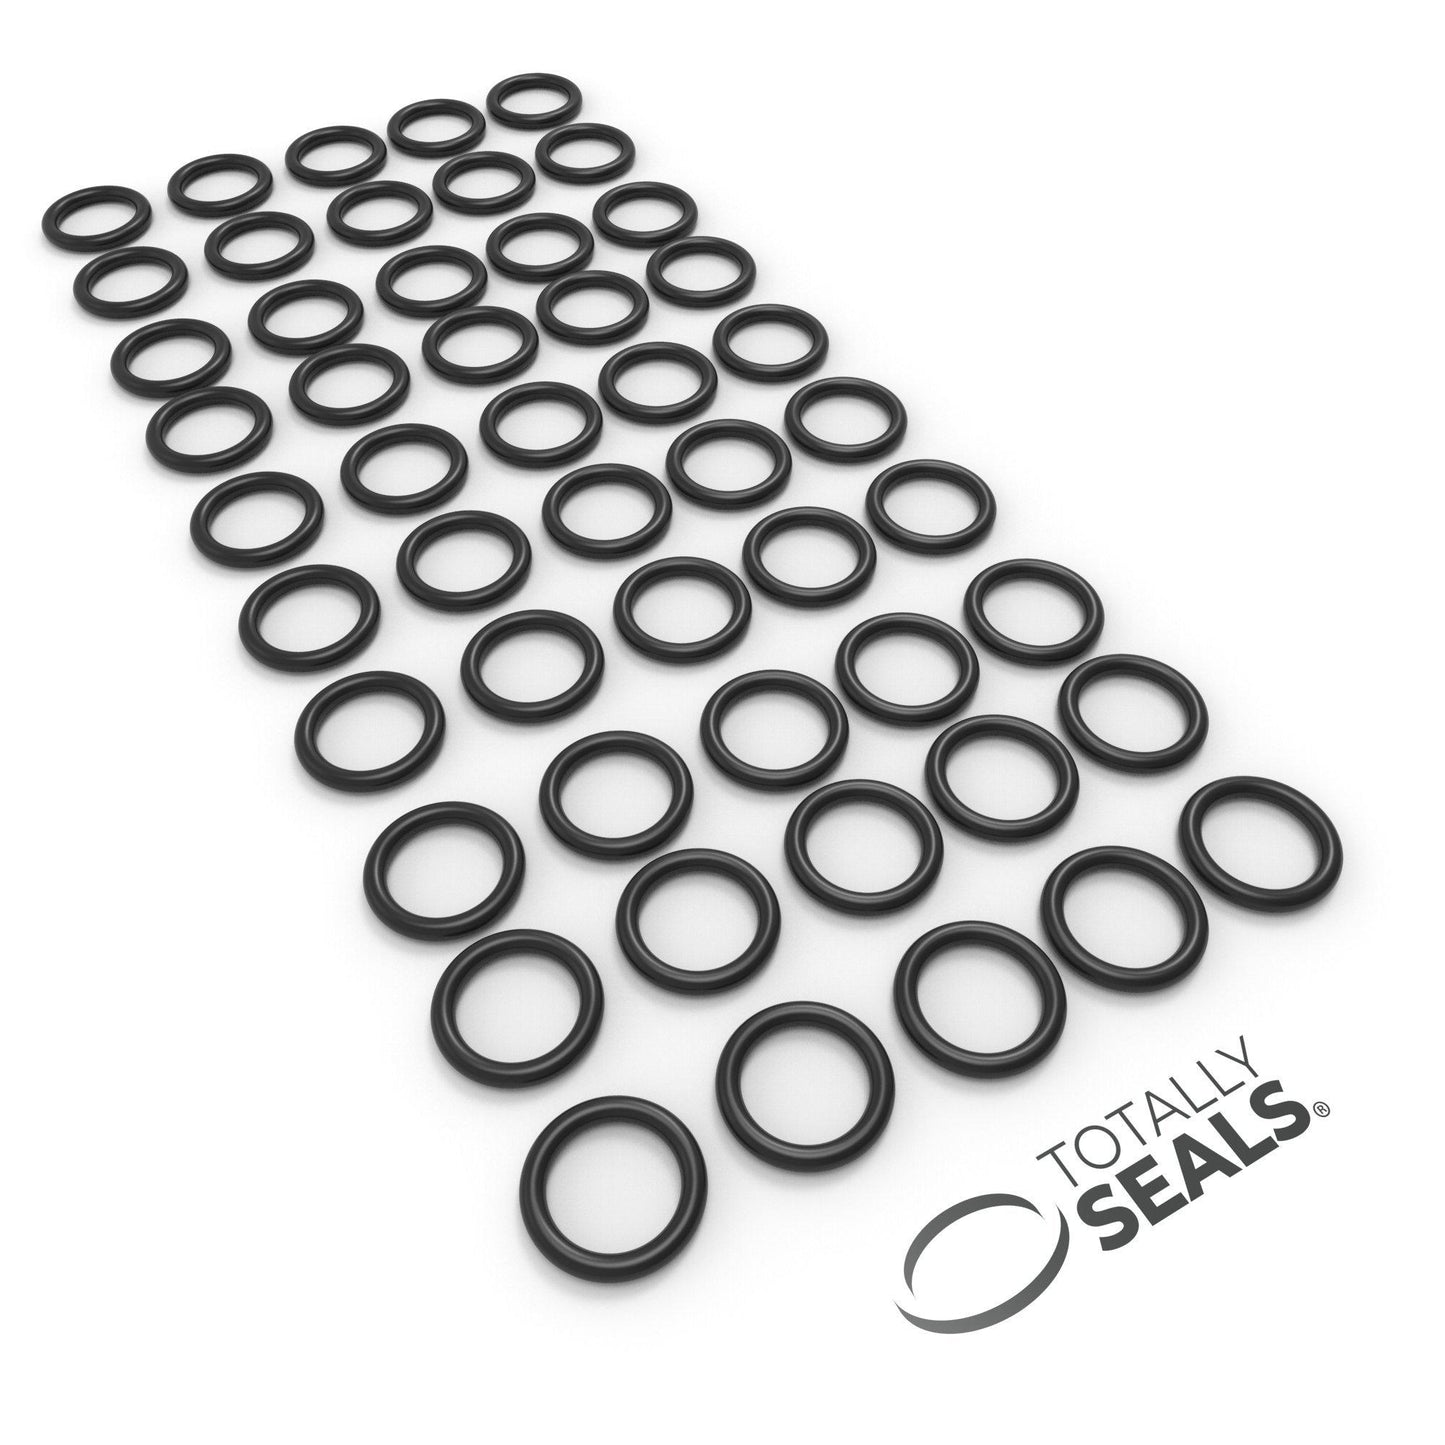 29mm x 1mm (31mm OD) Nitrile O-Rings - Totally Seals®